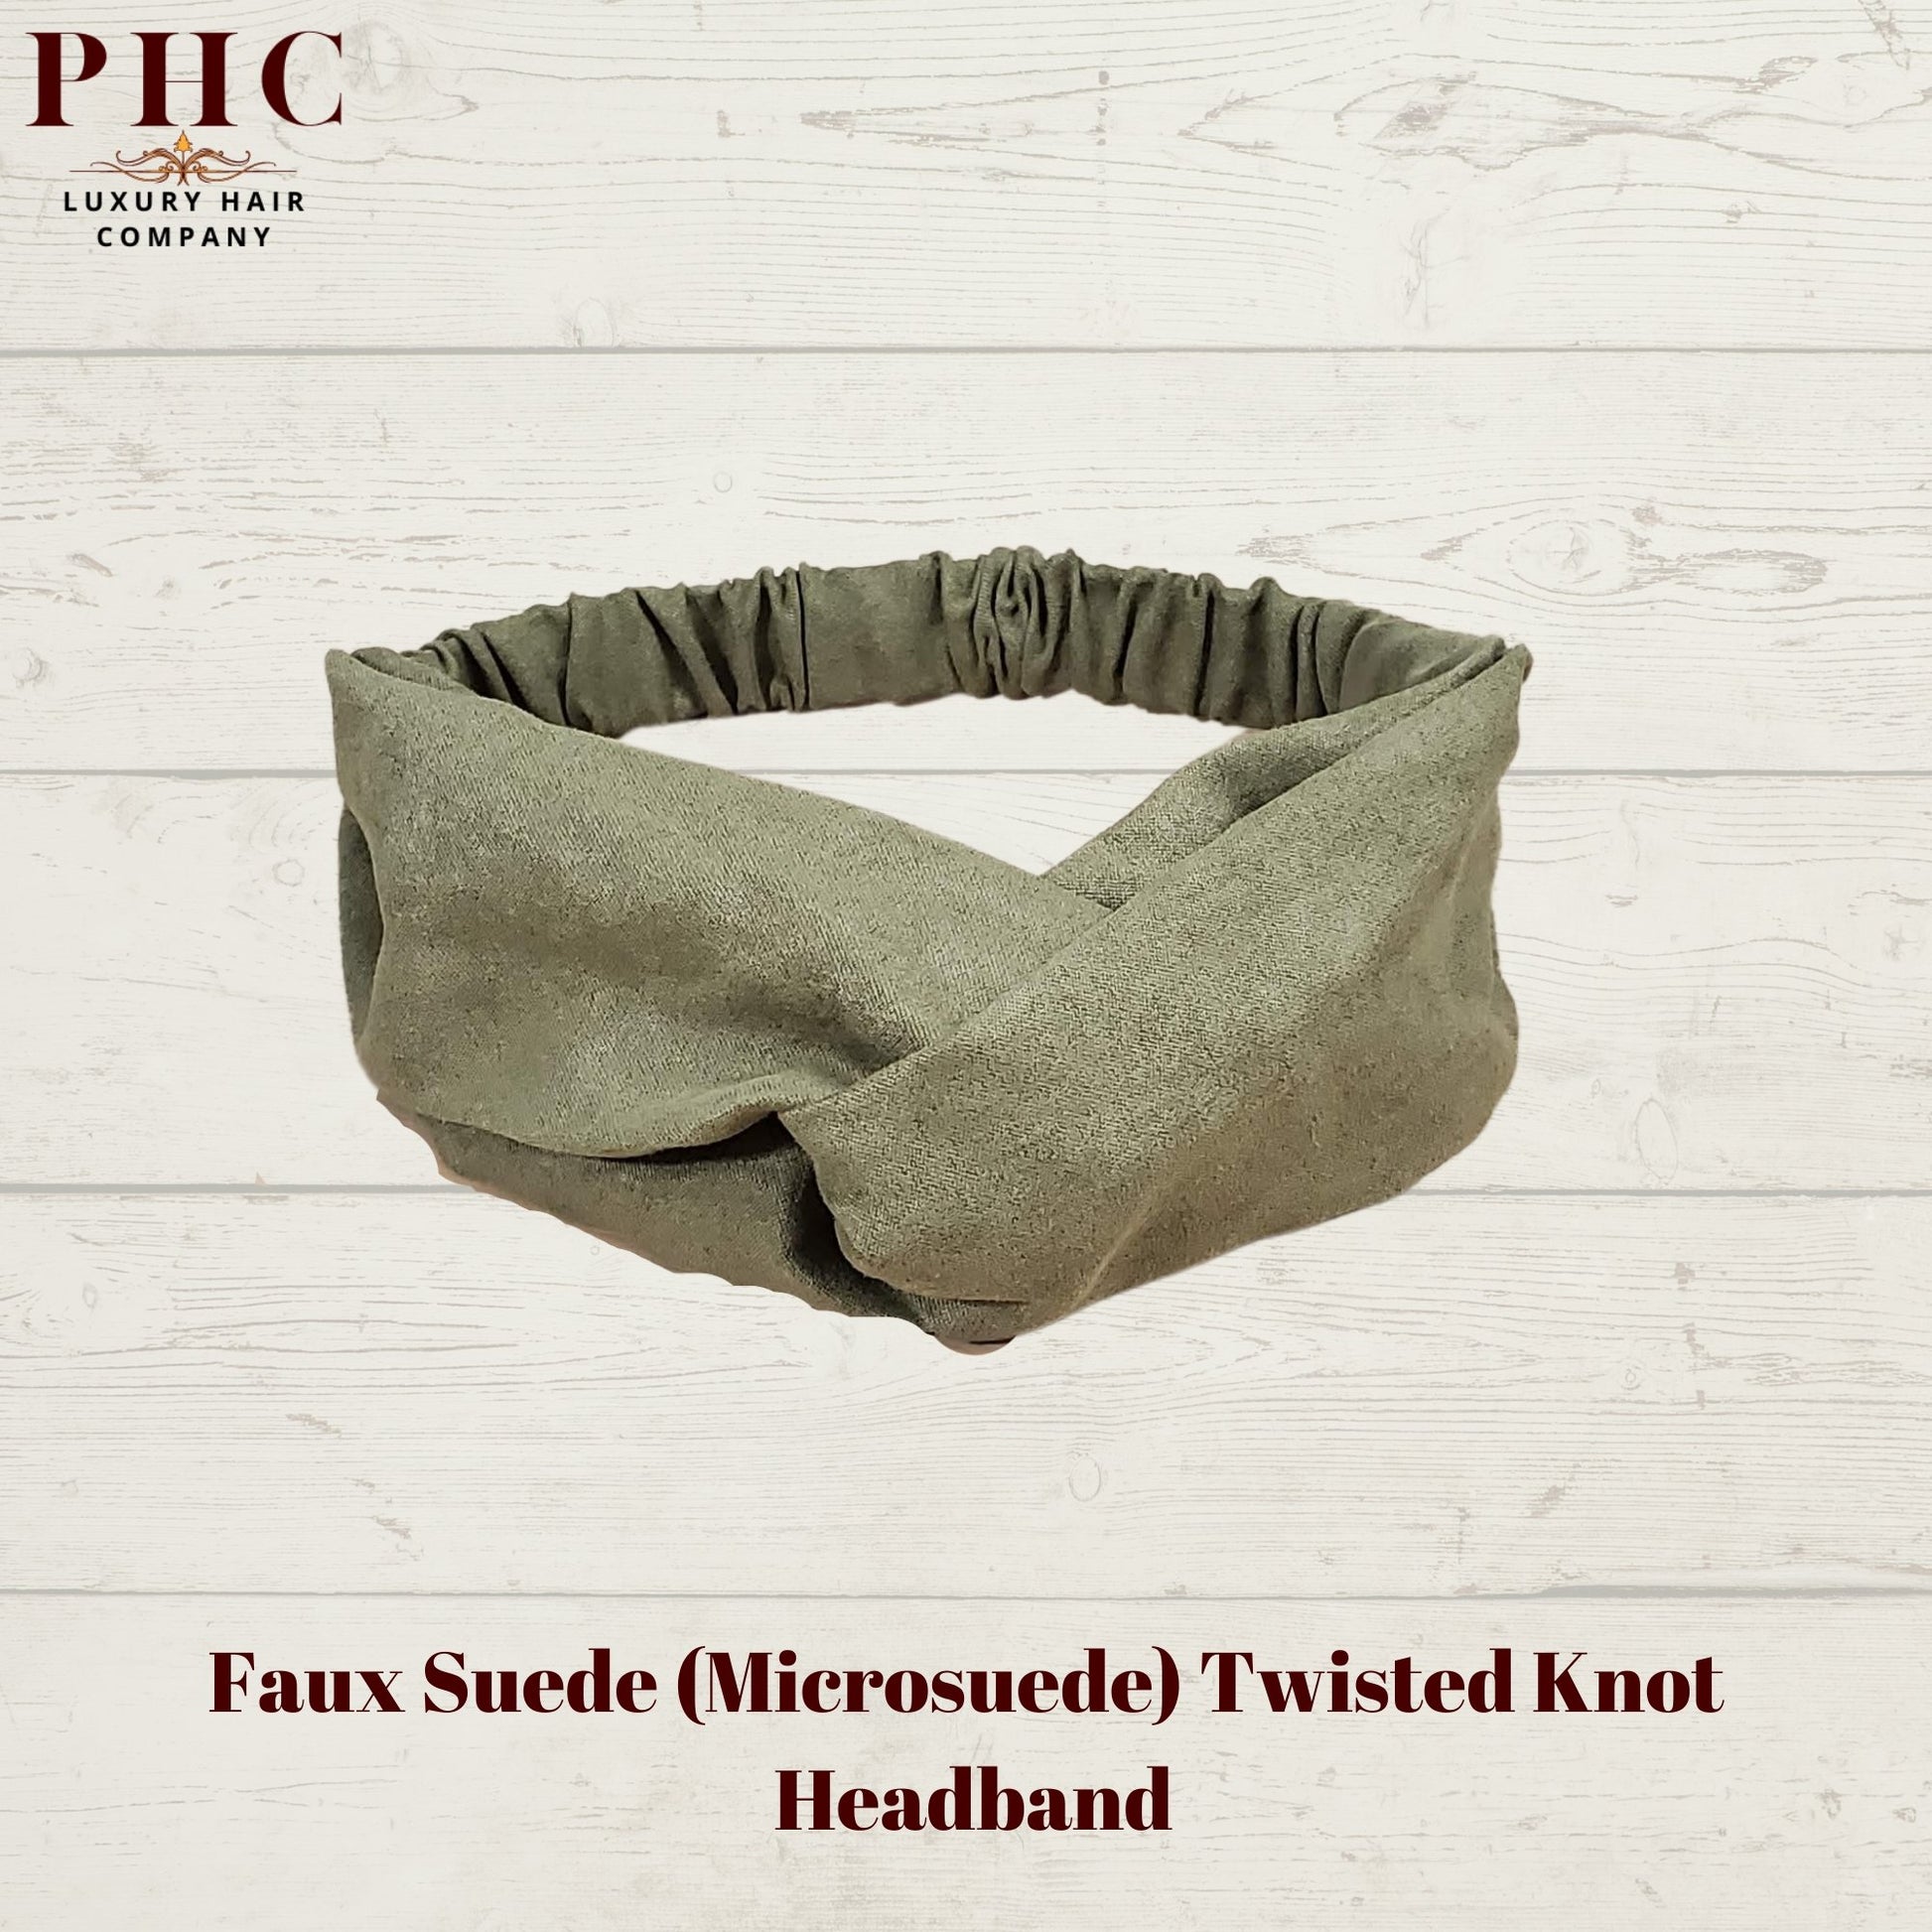 Faux Suede Twisted Knot Headband - PHC